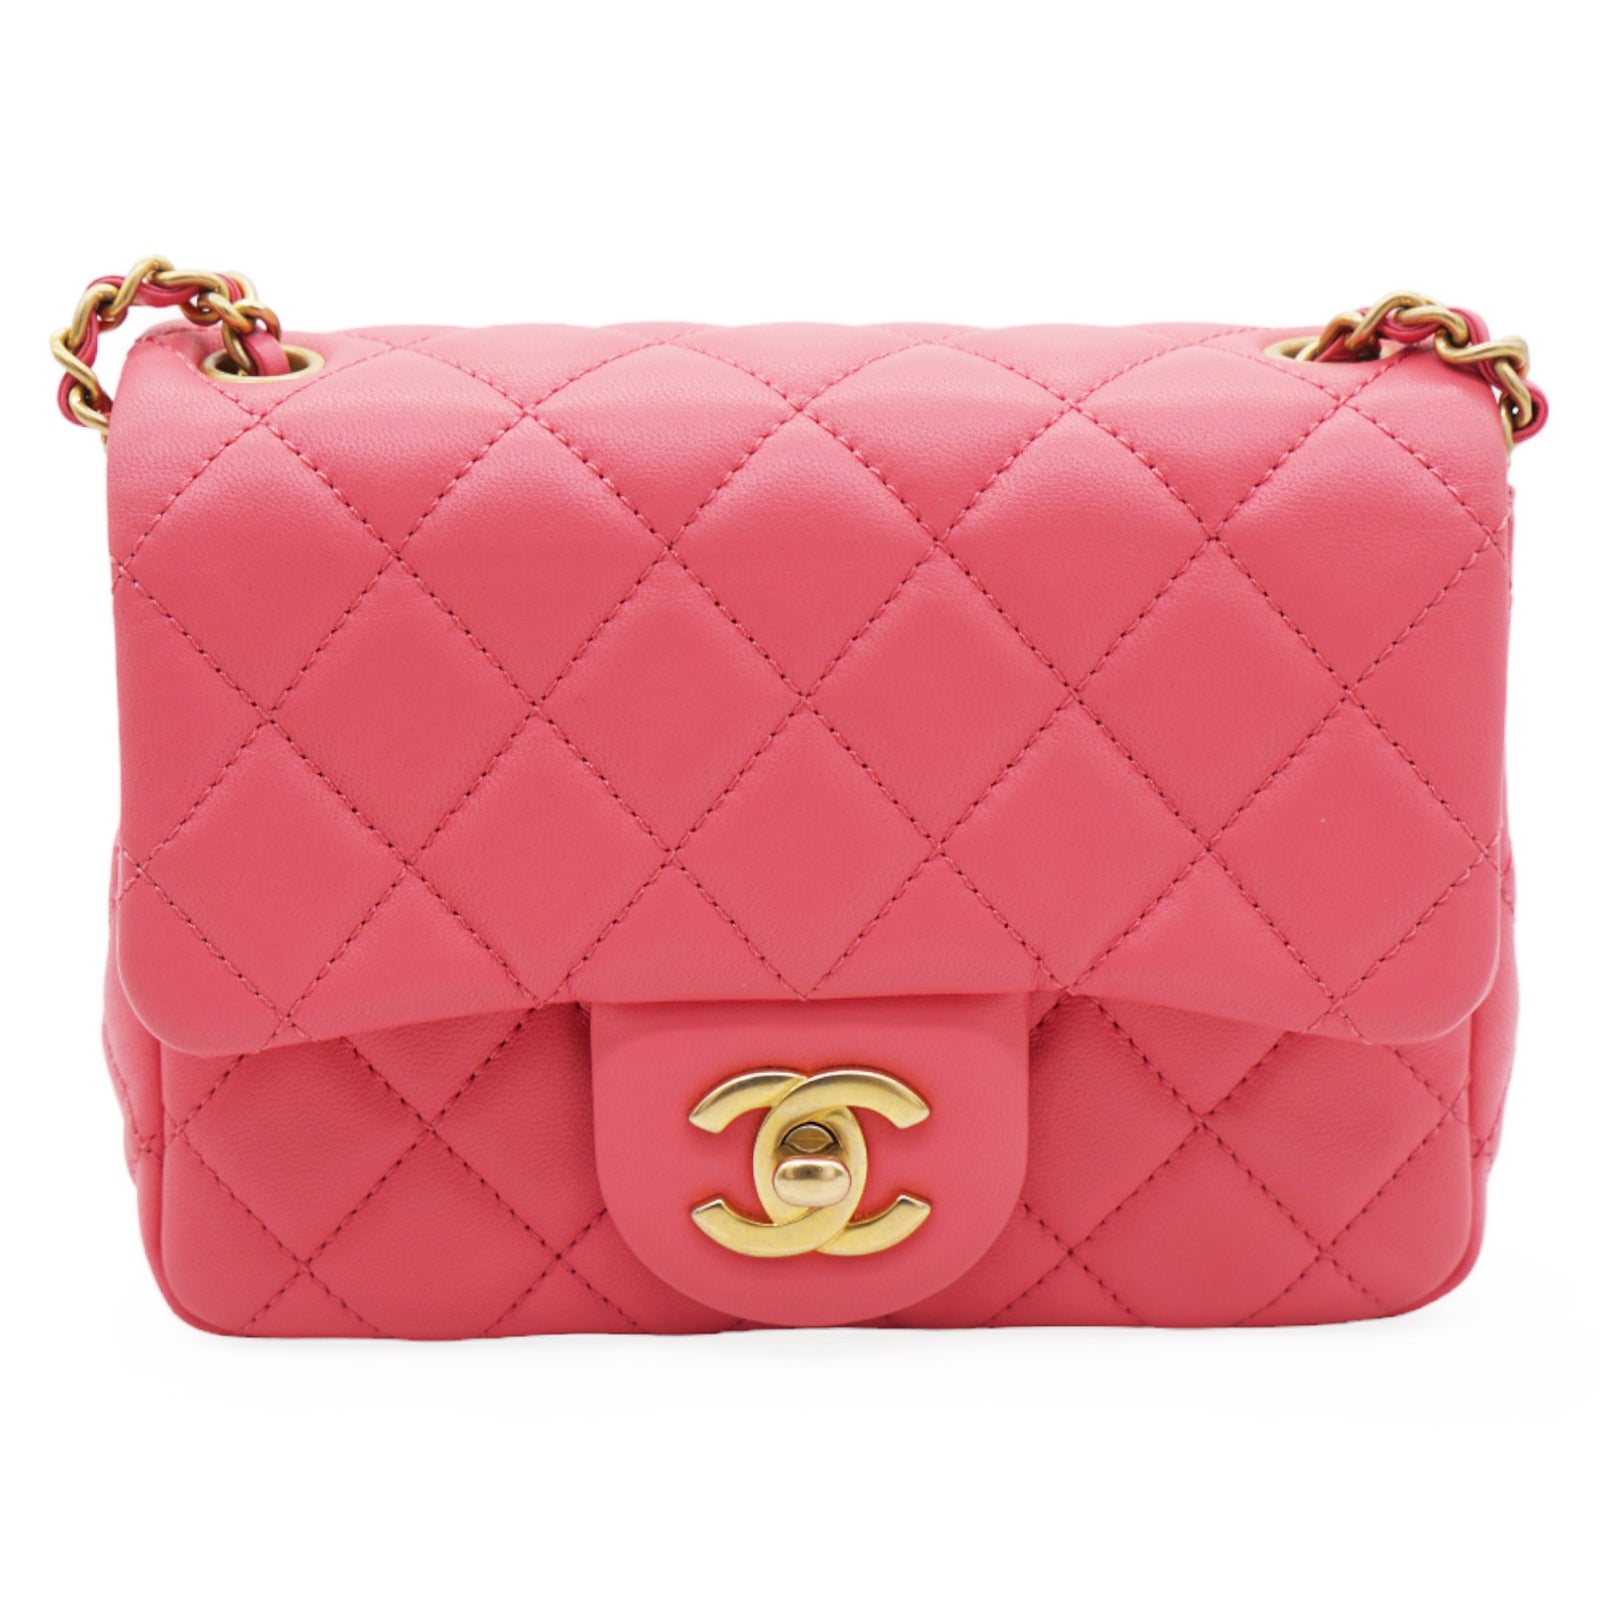 Chanel square mini : straight or curved flap?